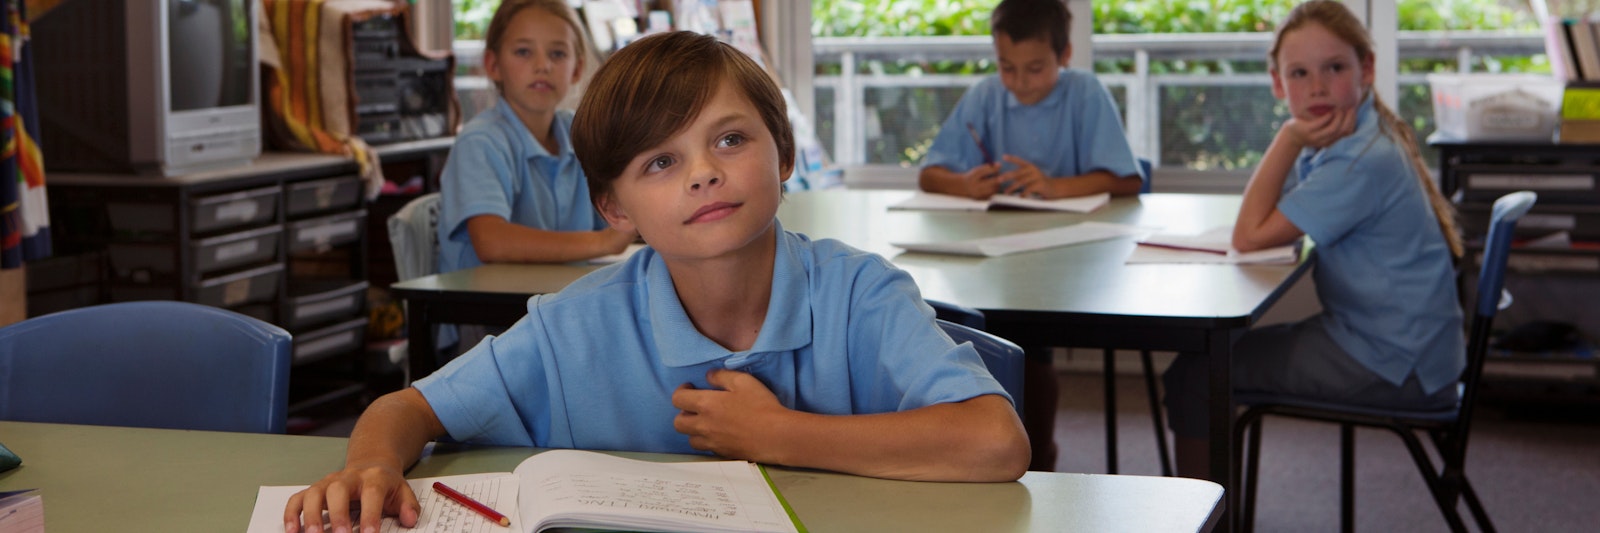 Boy sitting in classroom with book in front of him